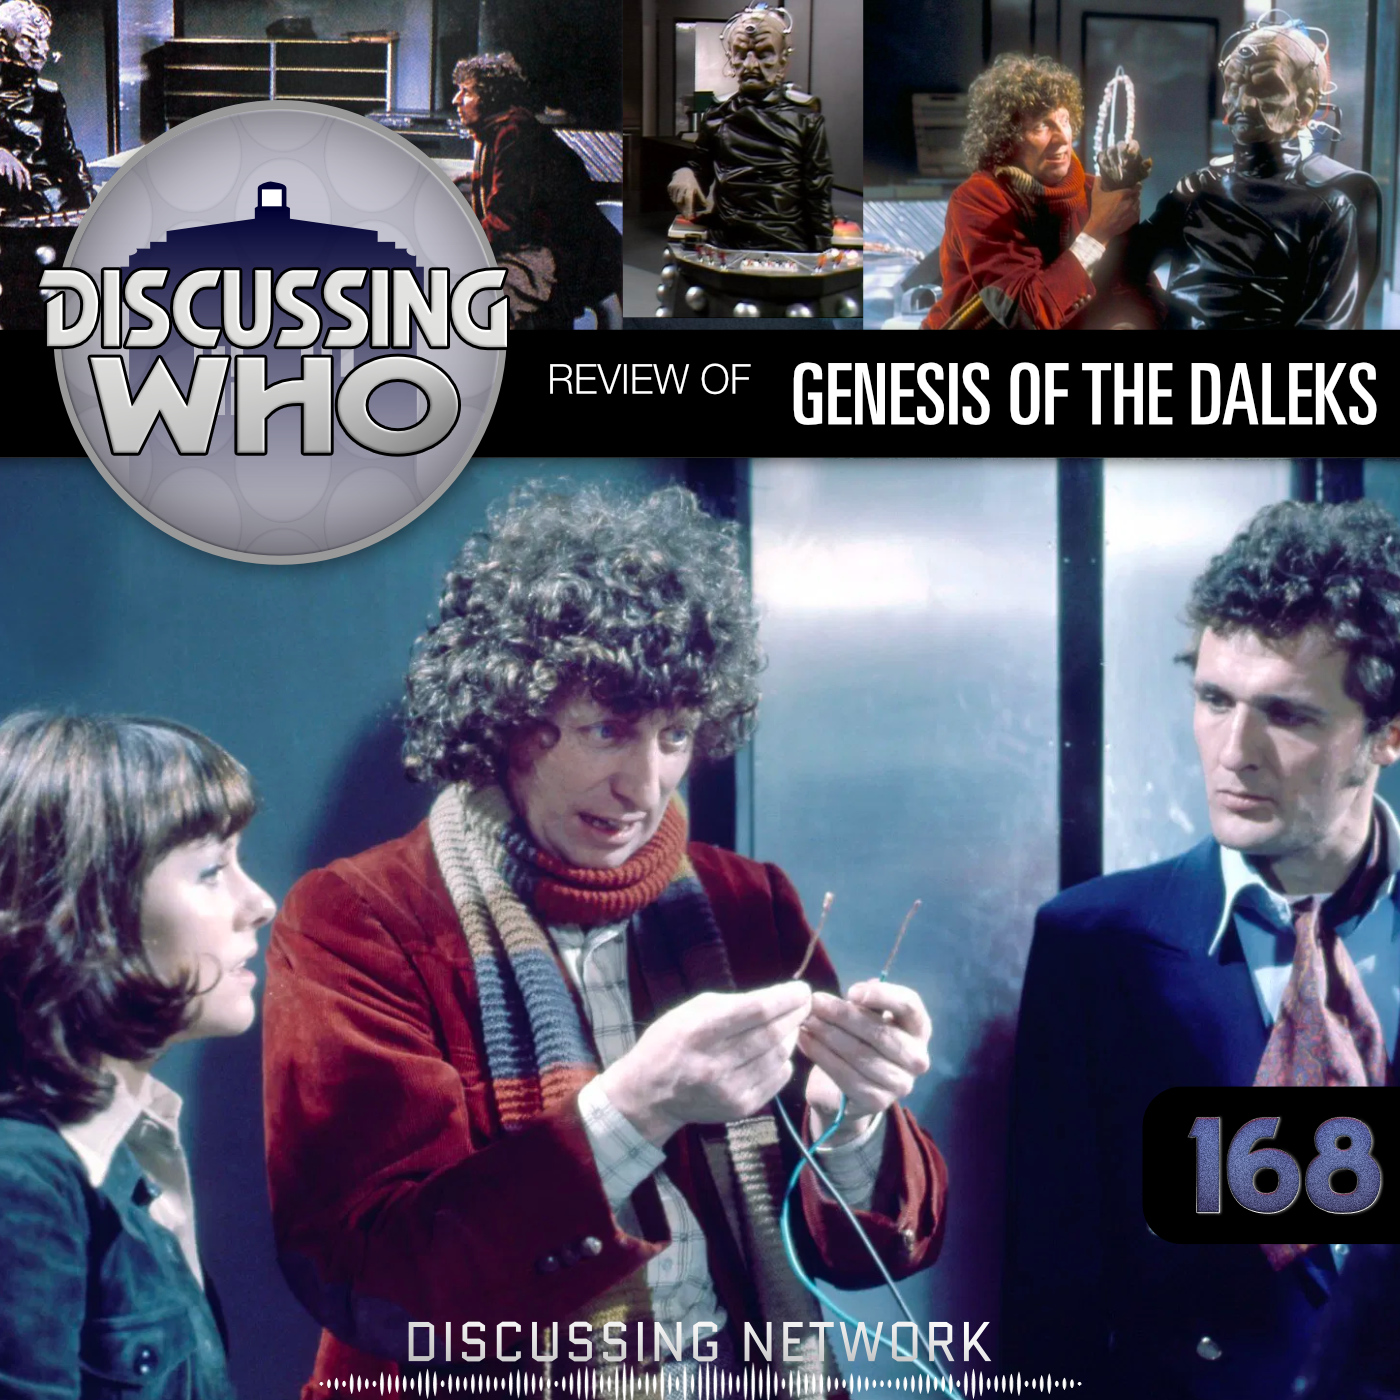 Discussing Who Episode 168 Review of Genesis of the Daleks